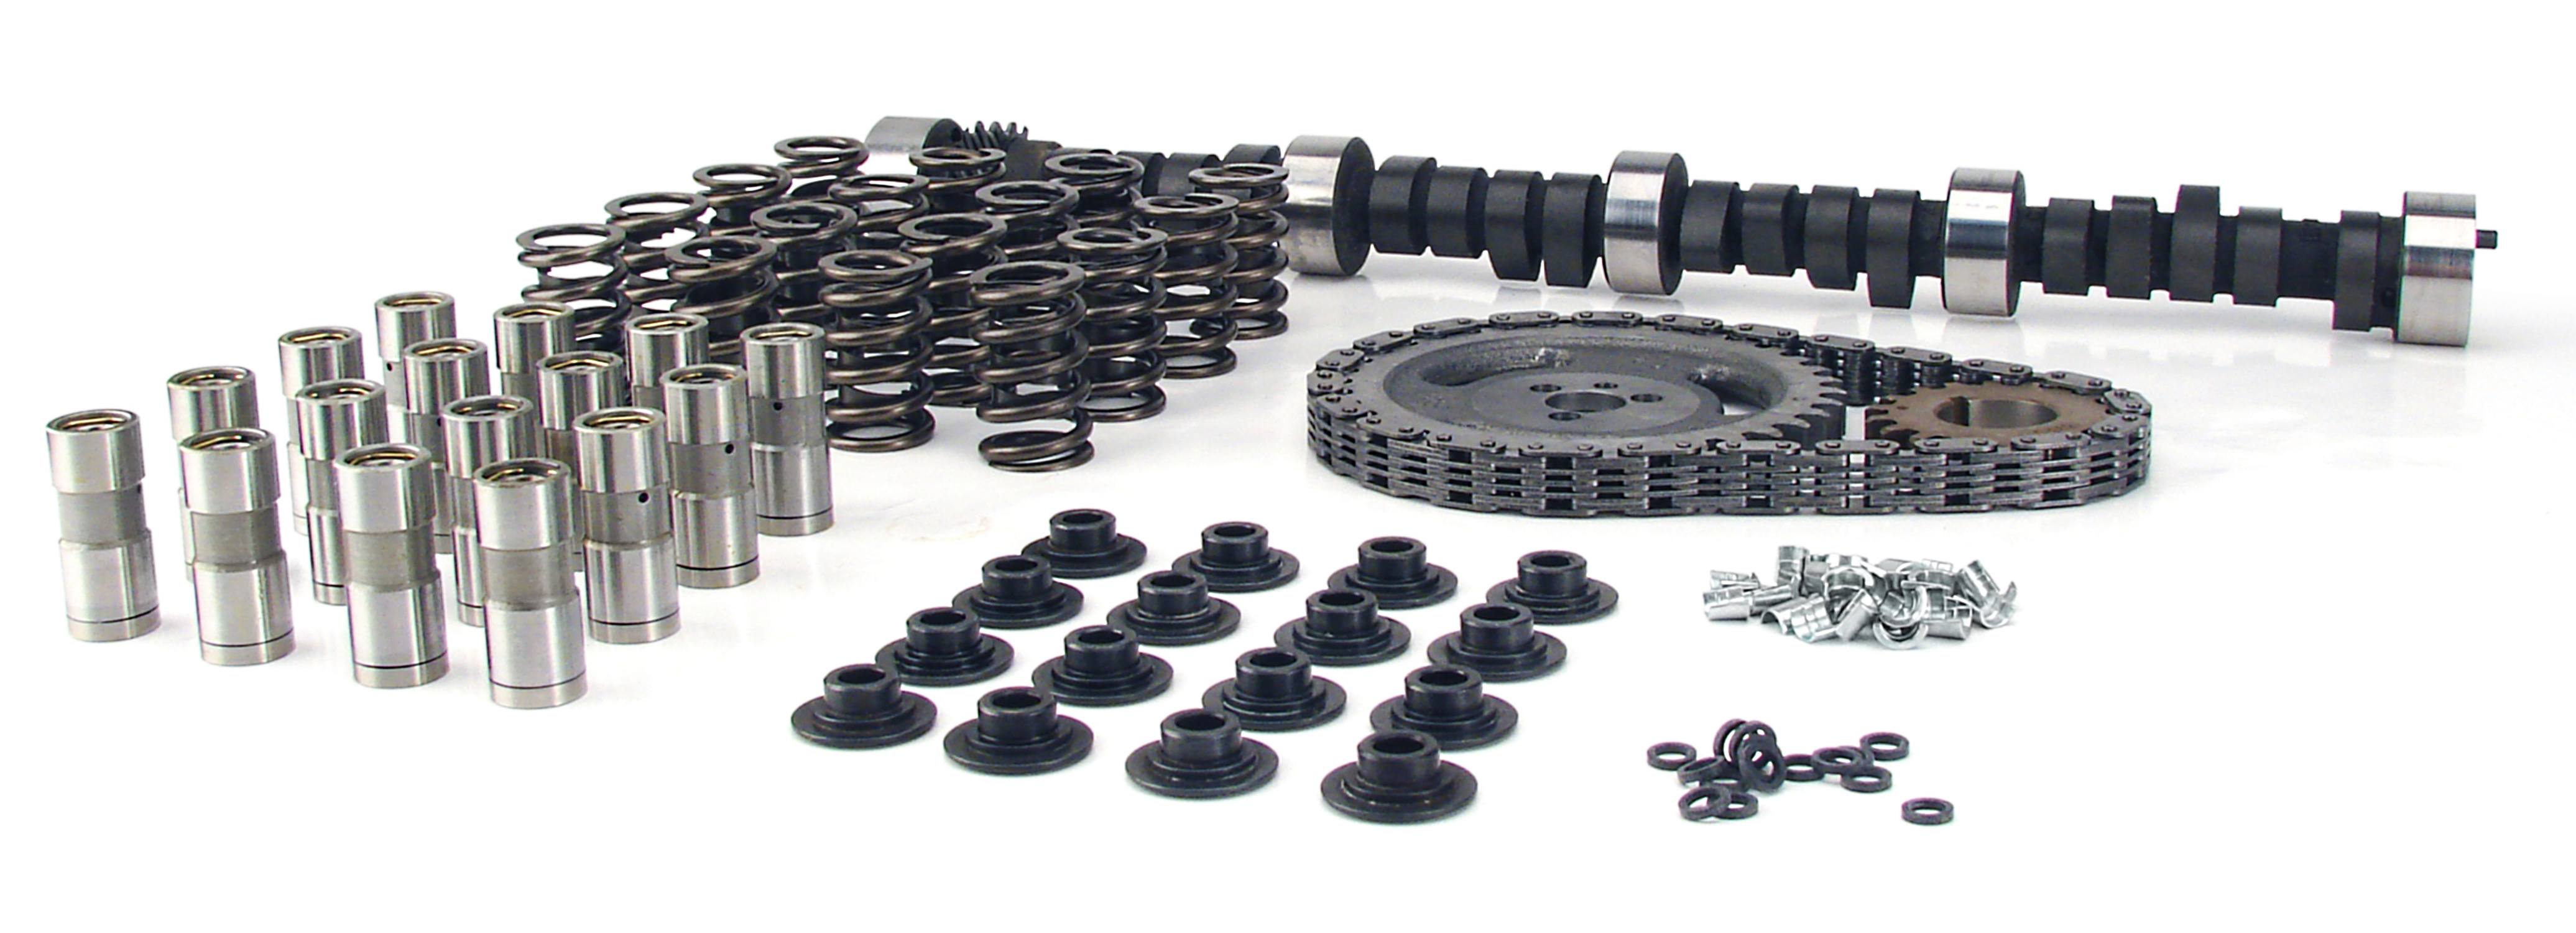 Set of 16 Single Springs w/ 1.254" O.D., 1.254" I.D., 1.700" Installed Height - K12-556-4